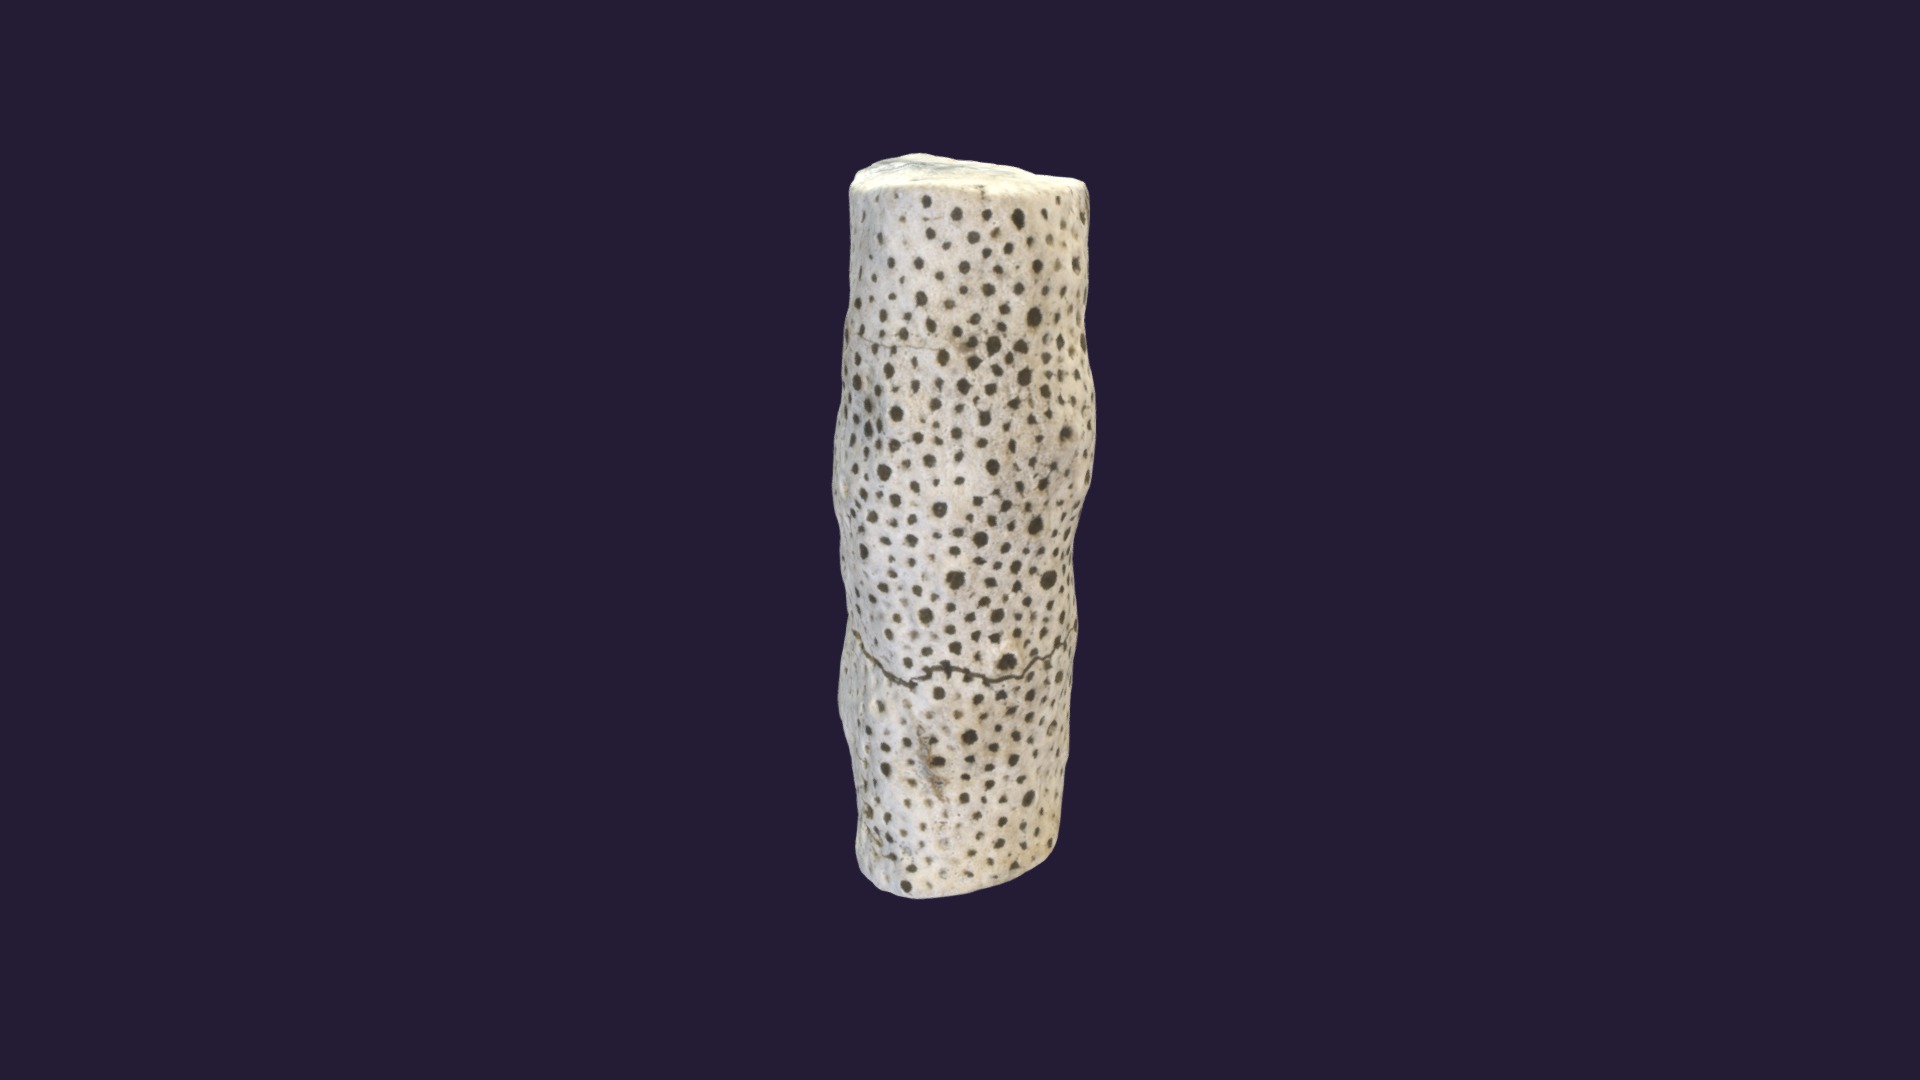 3D model Chaetetes attrilus - This is a 3D model of the Chaetetes attrilus. The 3D model is about a cylindrical object with a black background.